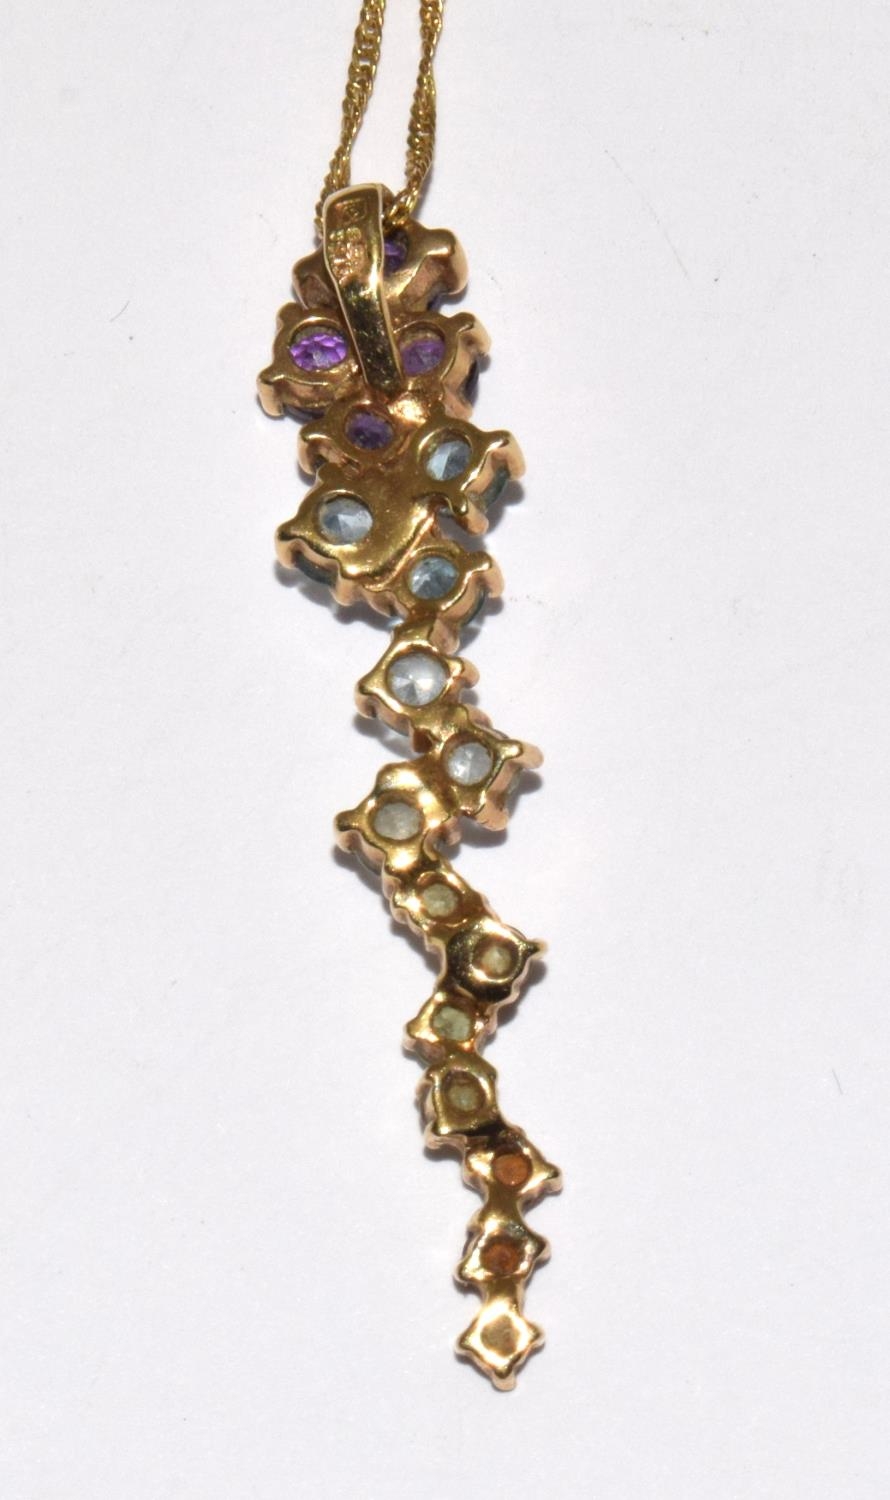 9ct gold Multi jem stone pendant necklace of Peridot, Topaz, Amethyst, and Citrine chain 46cm - Image 4 of 6